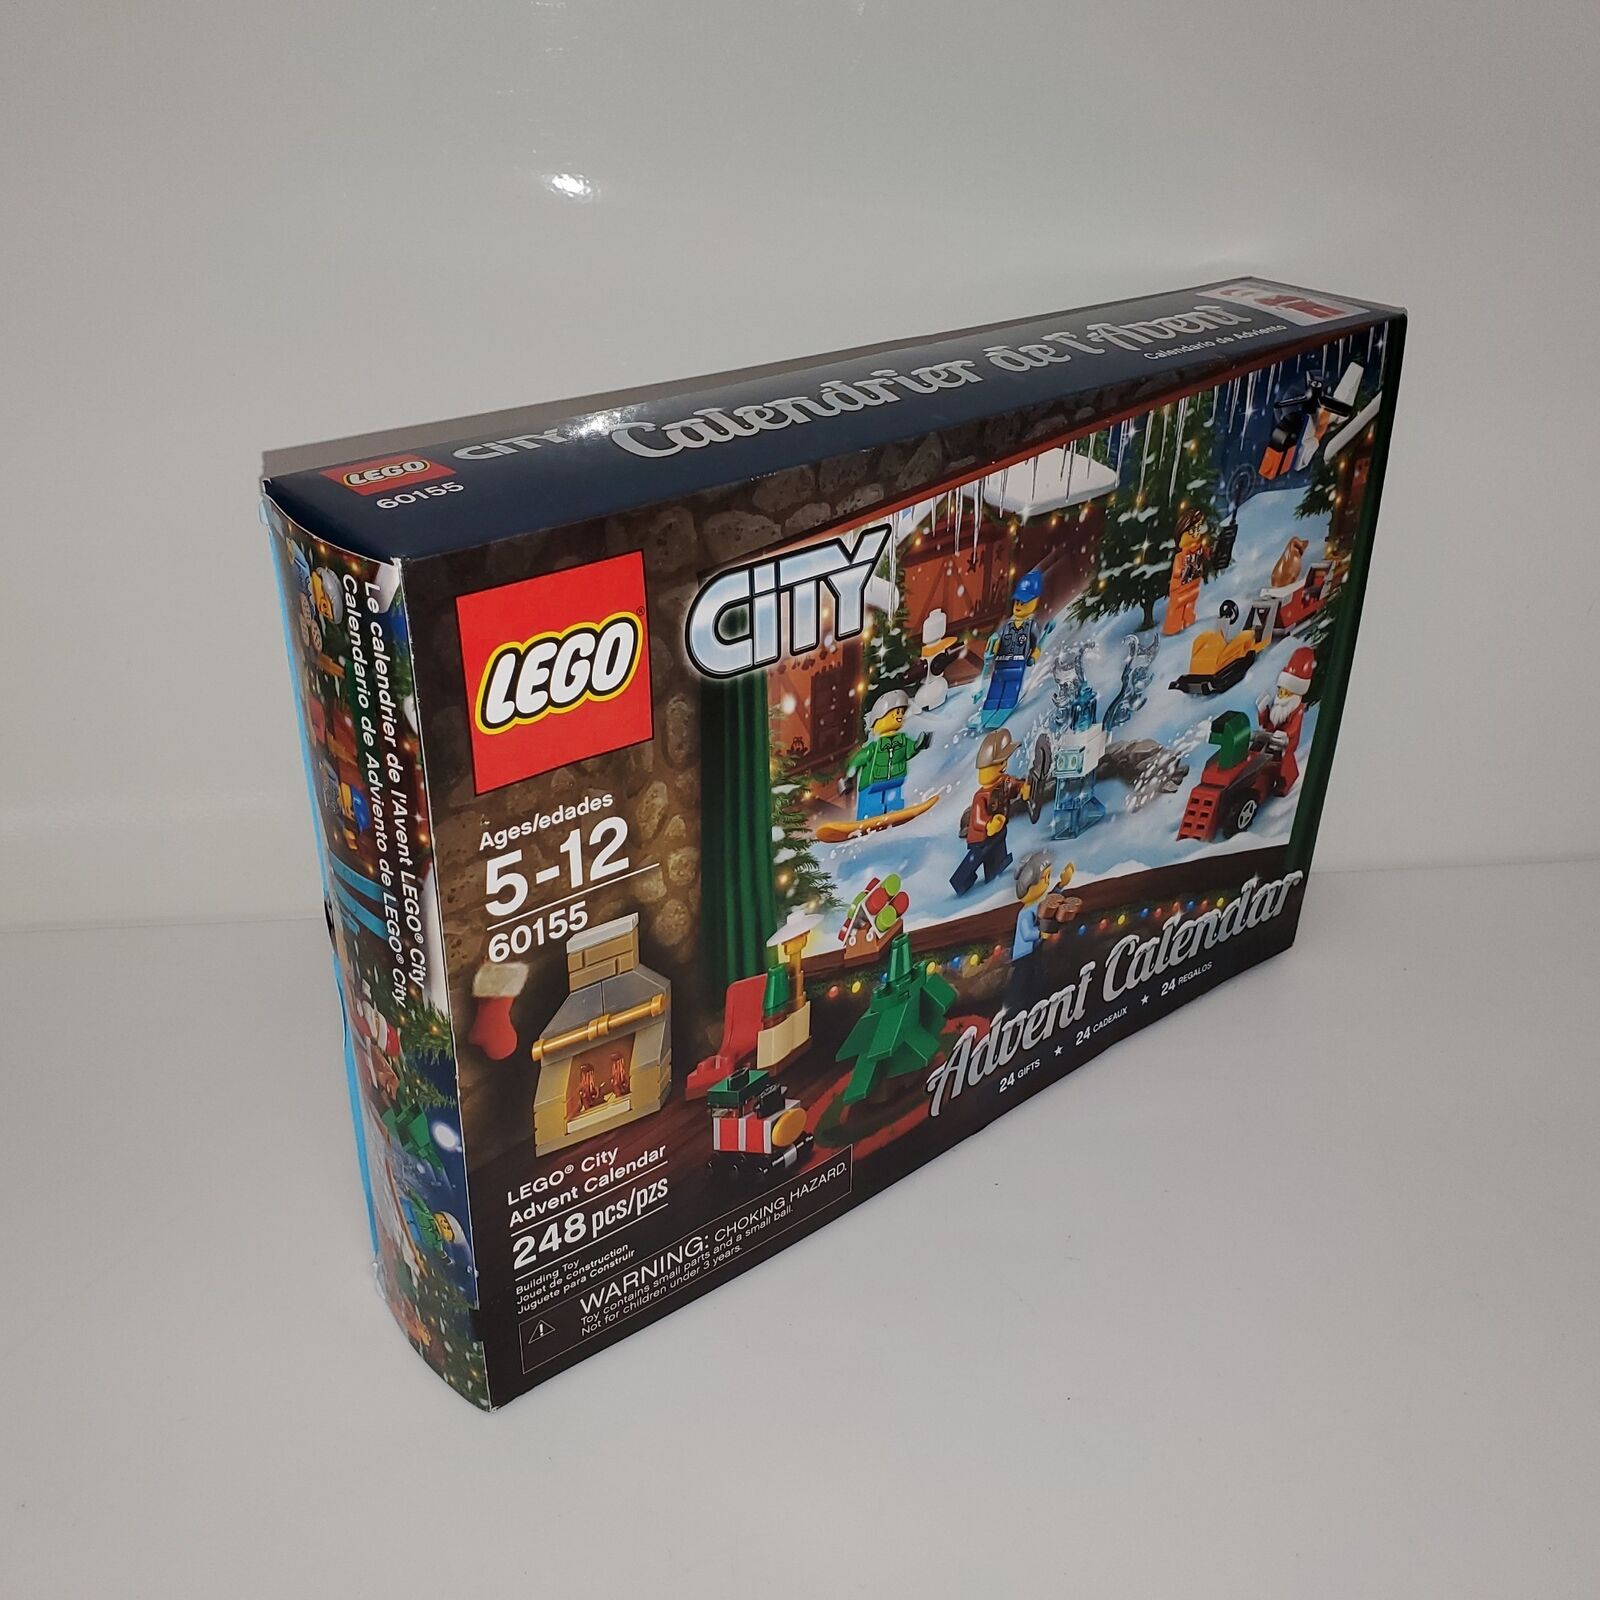 LEGO City Sealed Kit 60155 Advent Calendar - 24 Gifts 248pcs for Ages 5-12